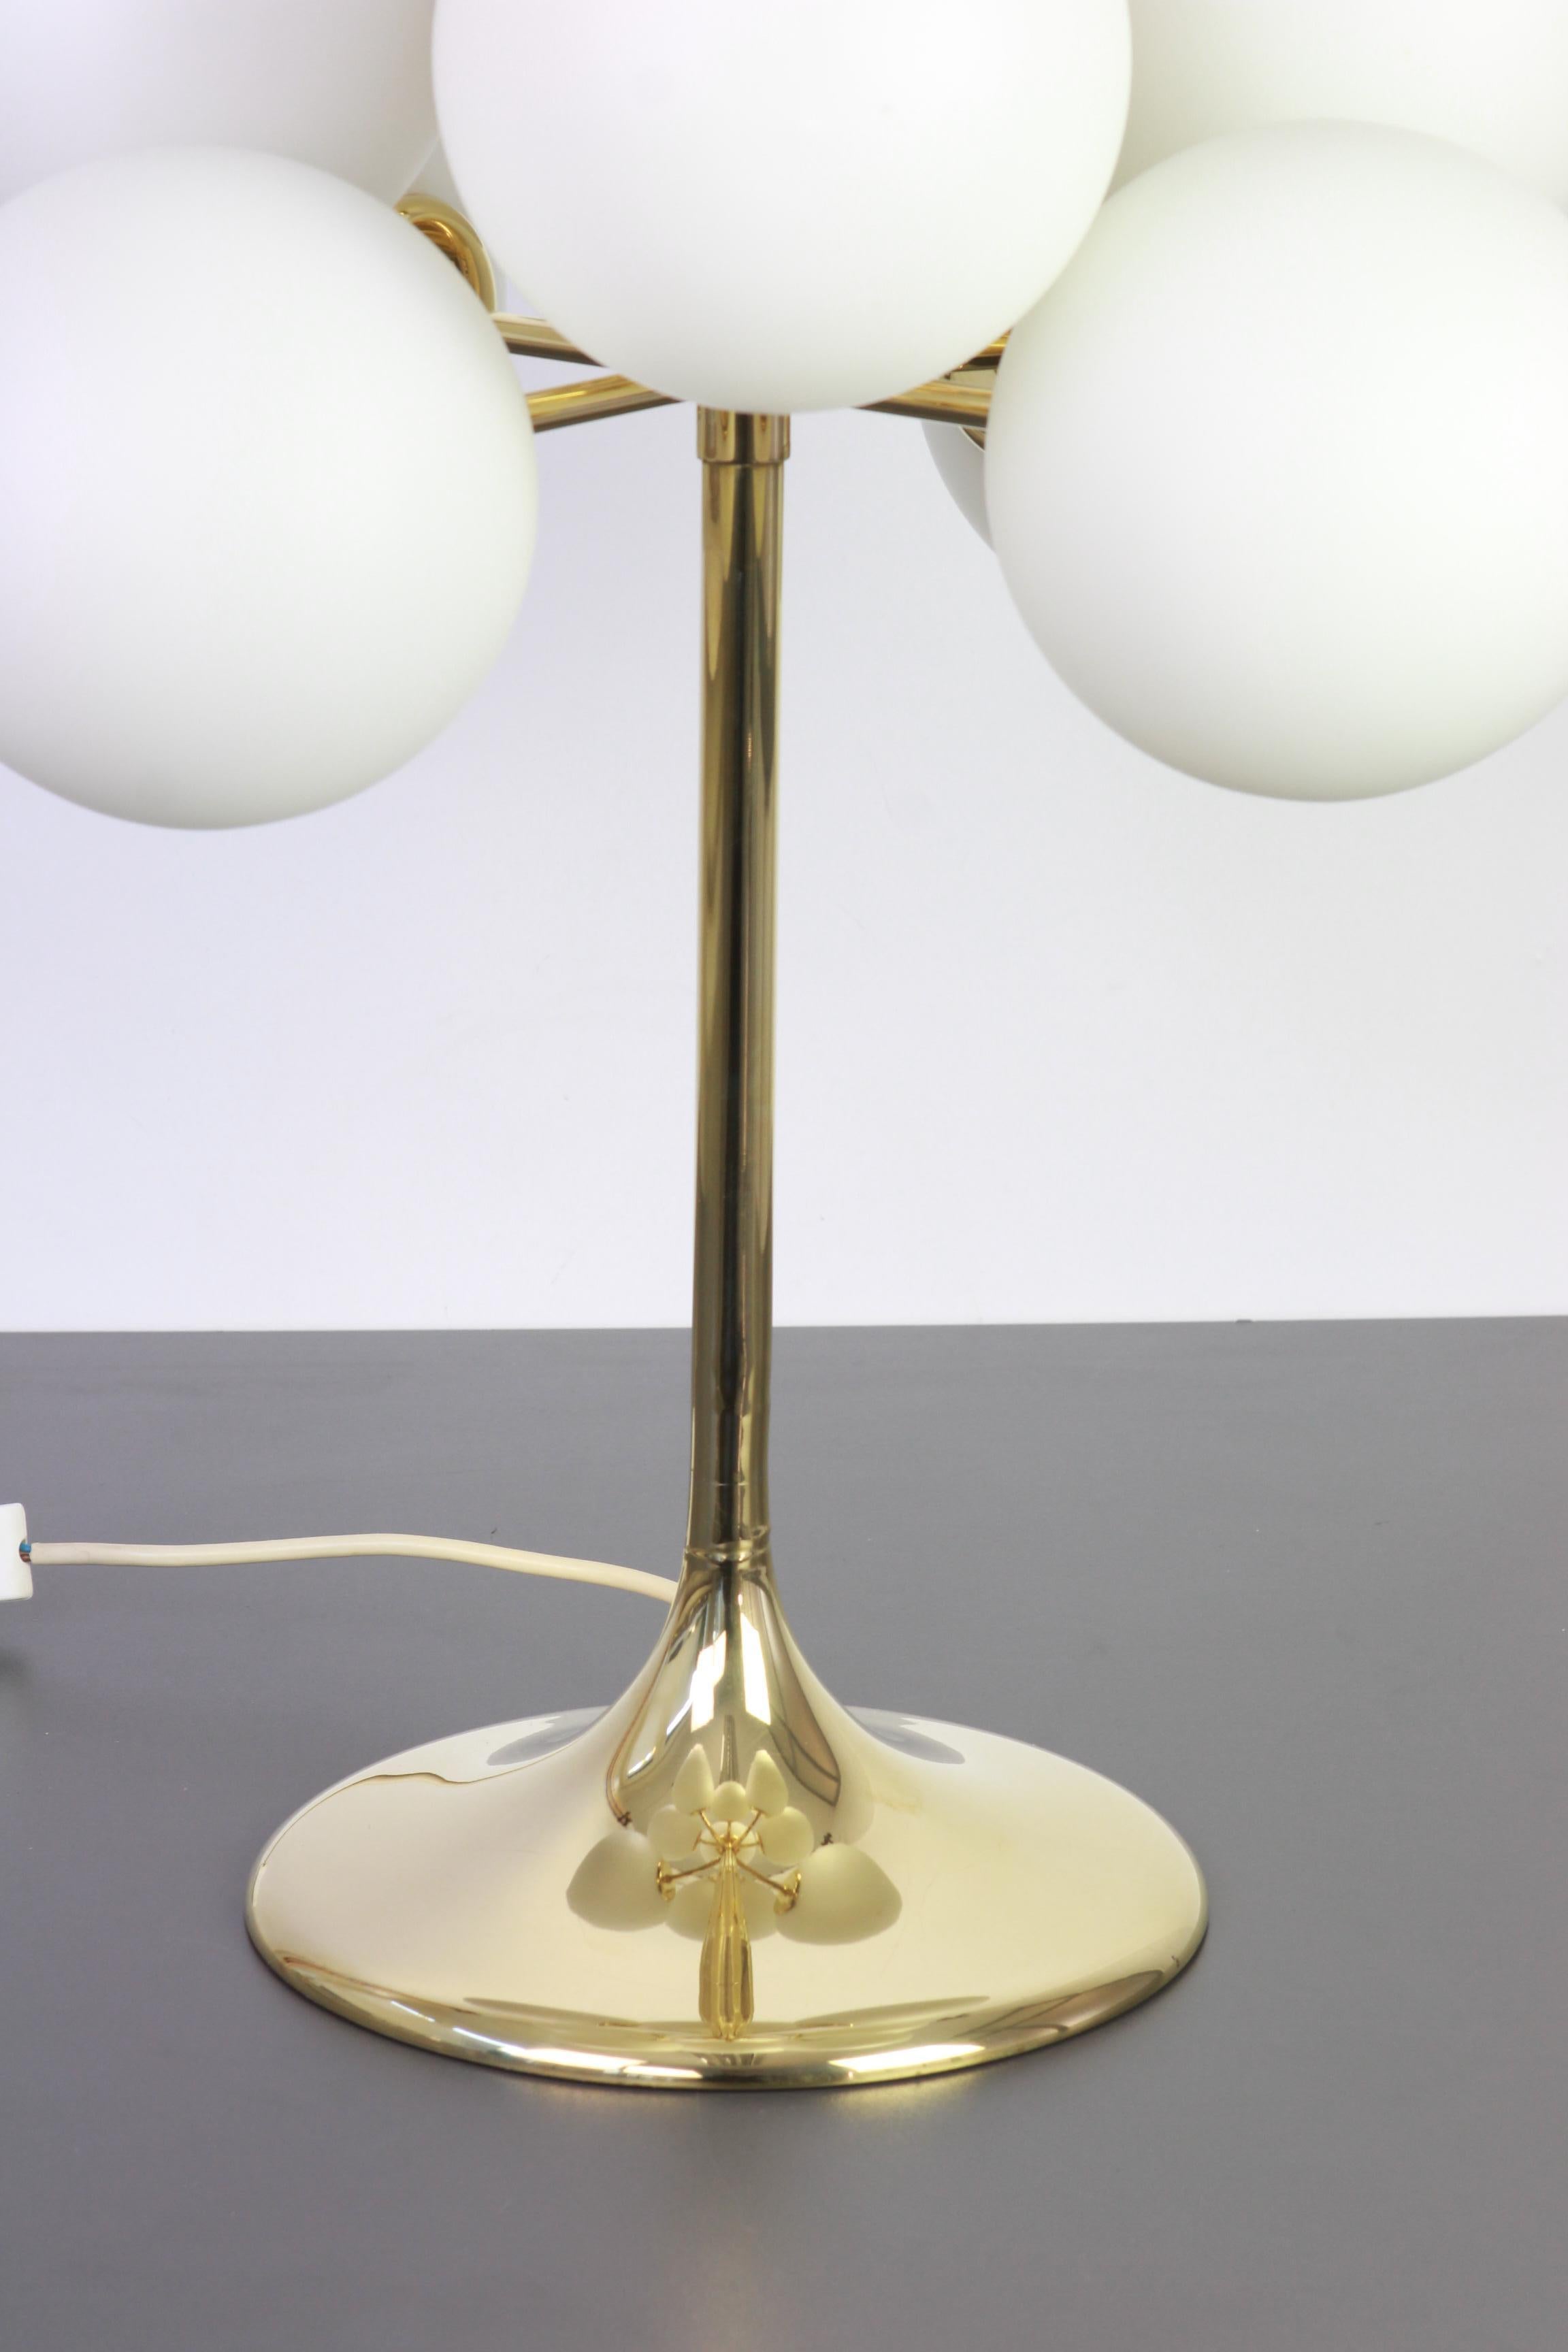 Atomic brass table lamp with nine-glass globes. The globes are hand blown and fitted with a screwing device.

High quality and in very good condition. Cleaned, well-wired and ready to use. 

The fixture requires 9 x E14 standard bulbs.
Light